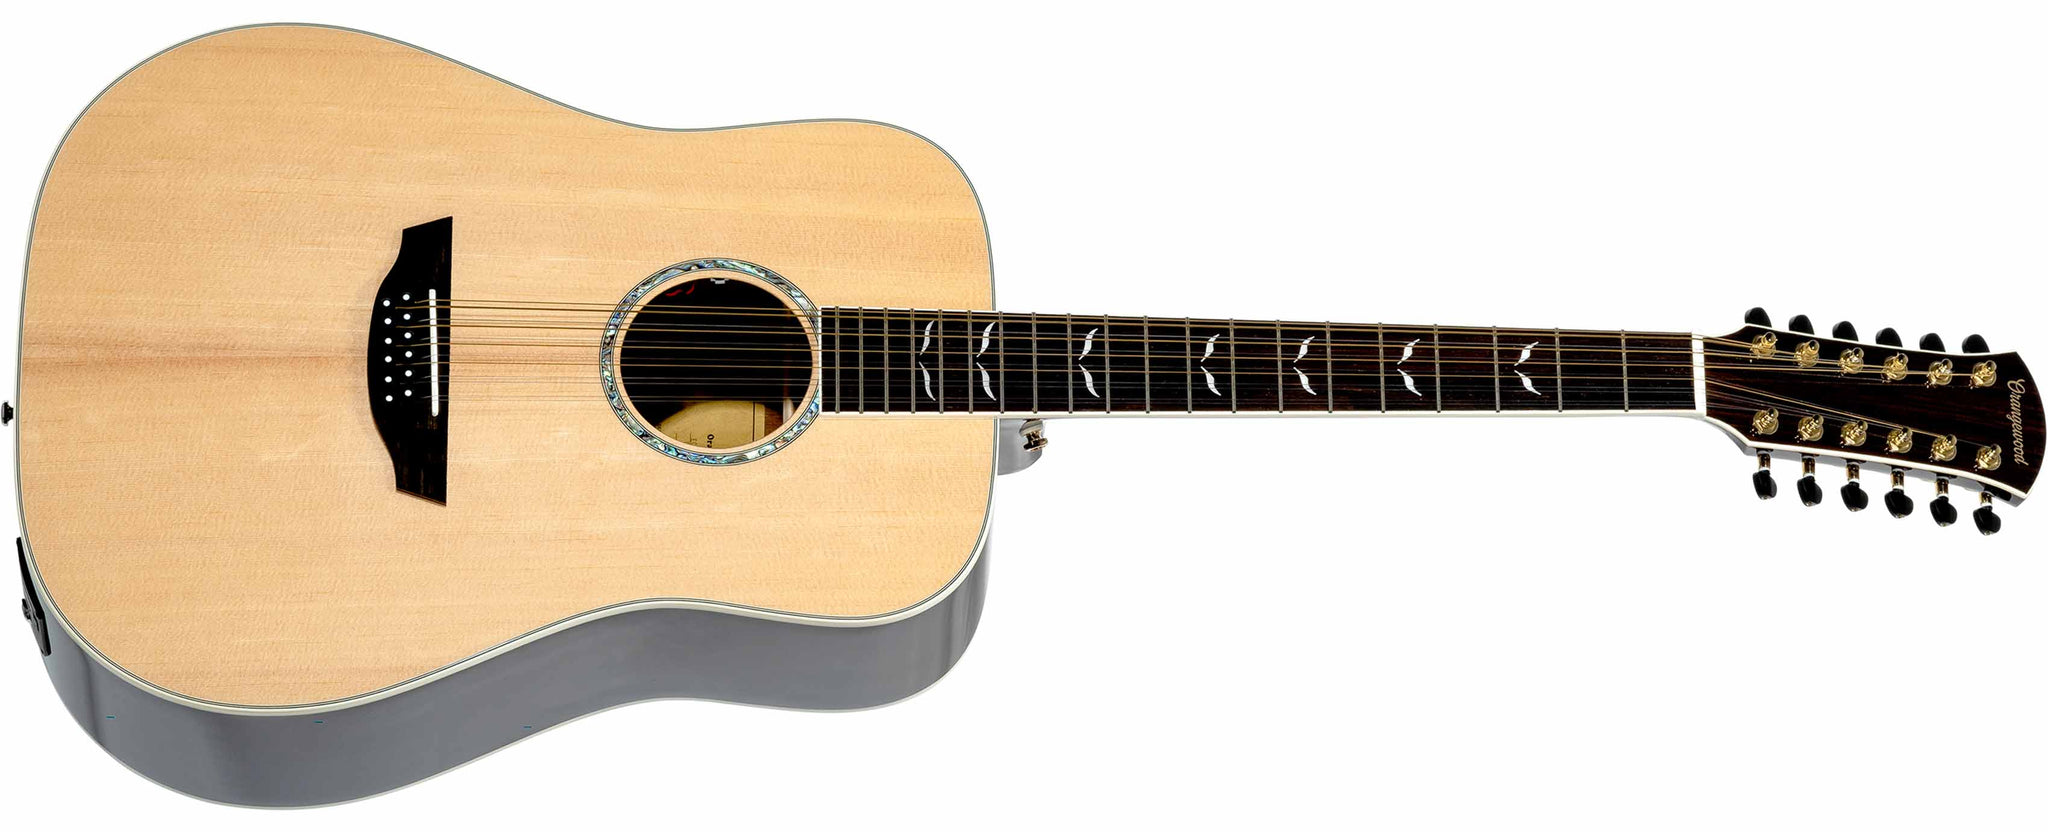 Echo 12 Live, Spruce 12-String Acoustic-Electric Guitar